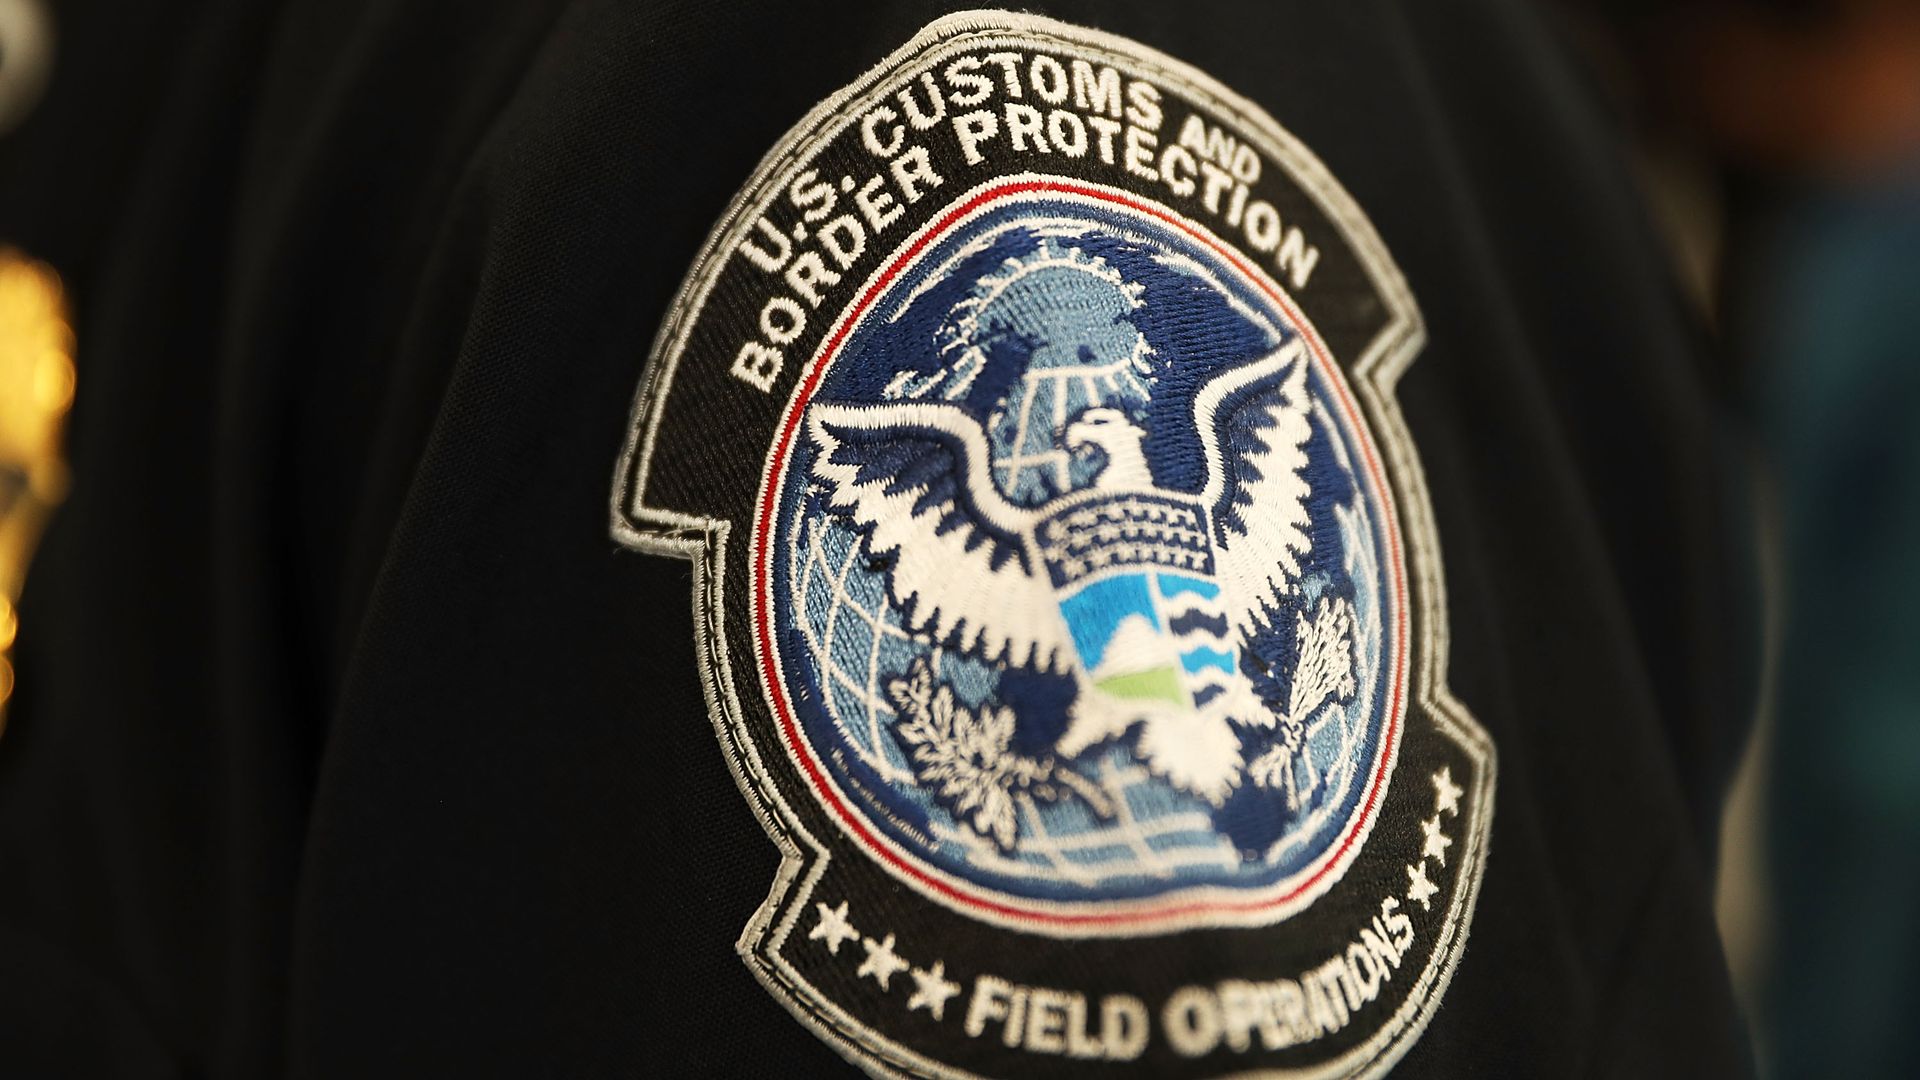 A Customs and Border Protection official at the airport